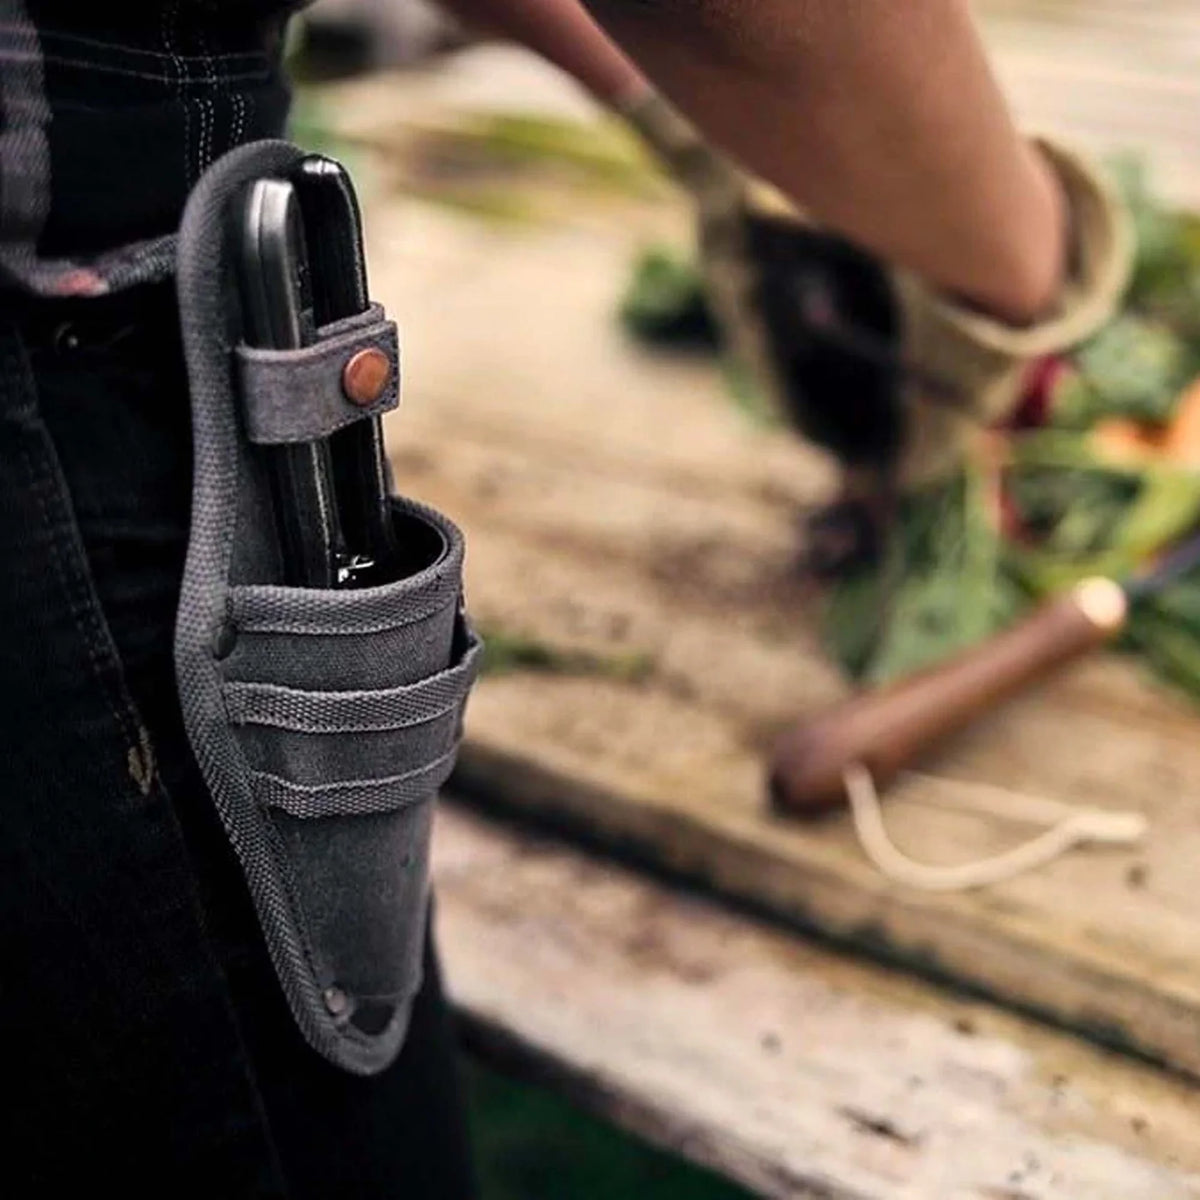 A gardener is holding a Barebones pruner with sheath in a leather holster.